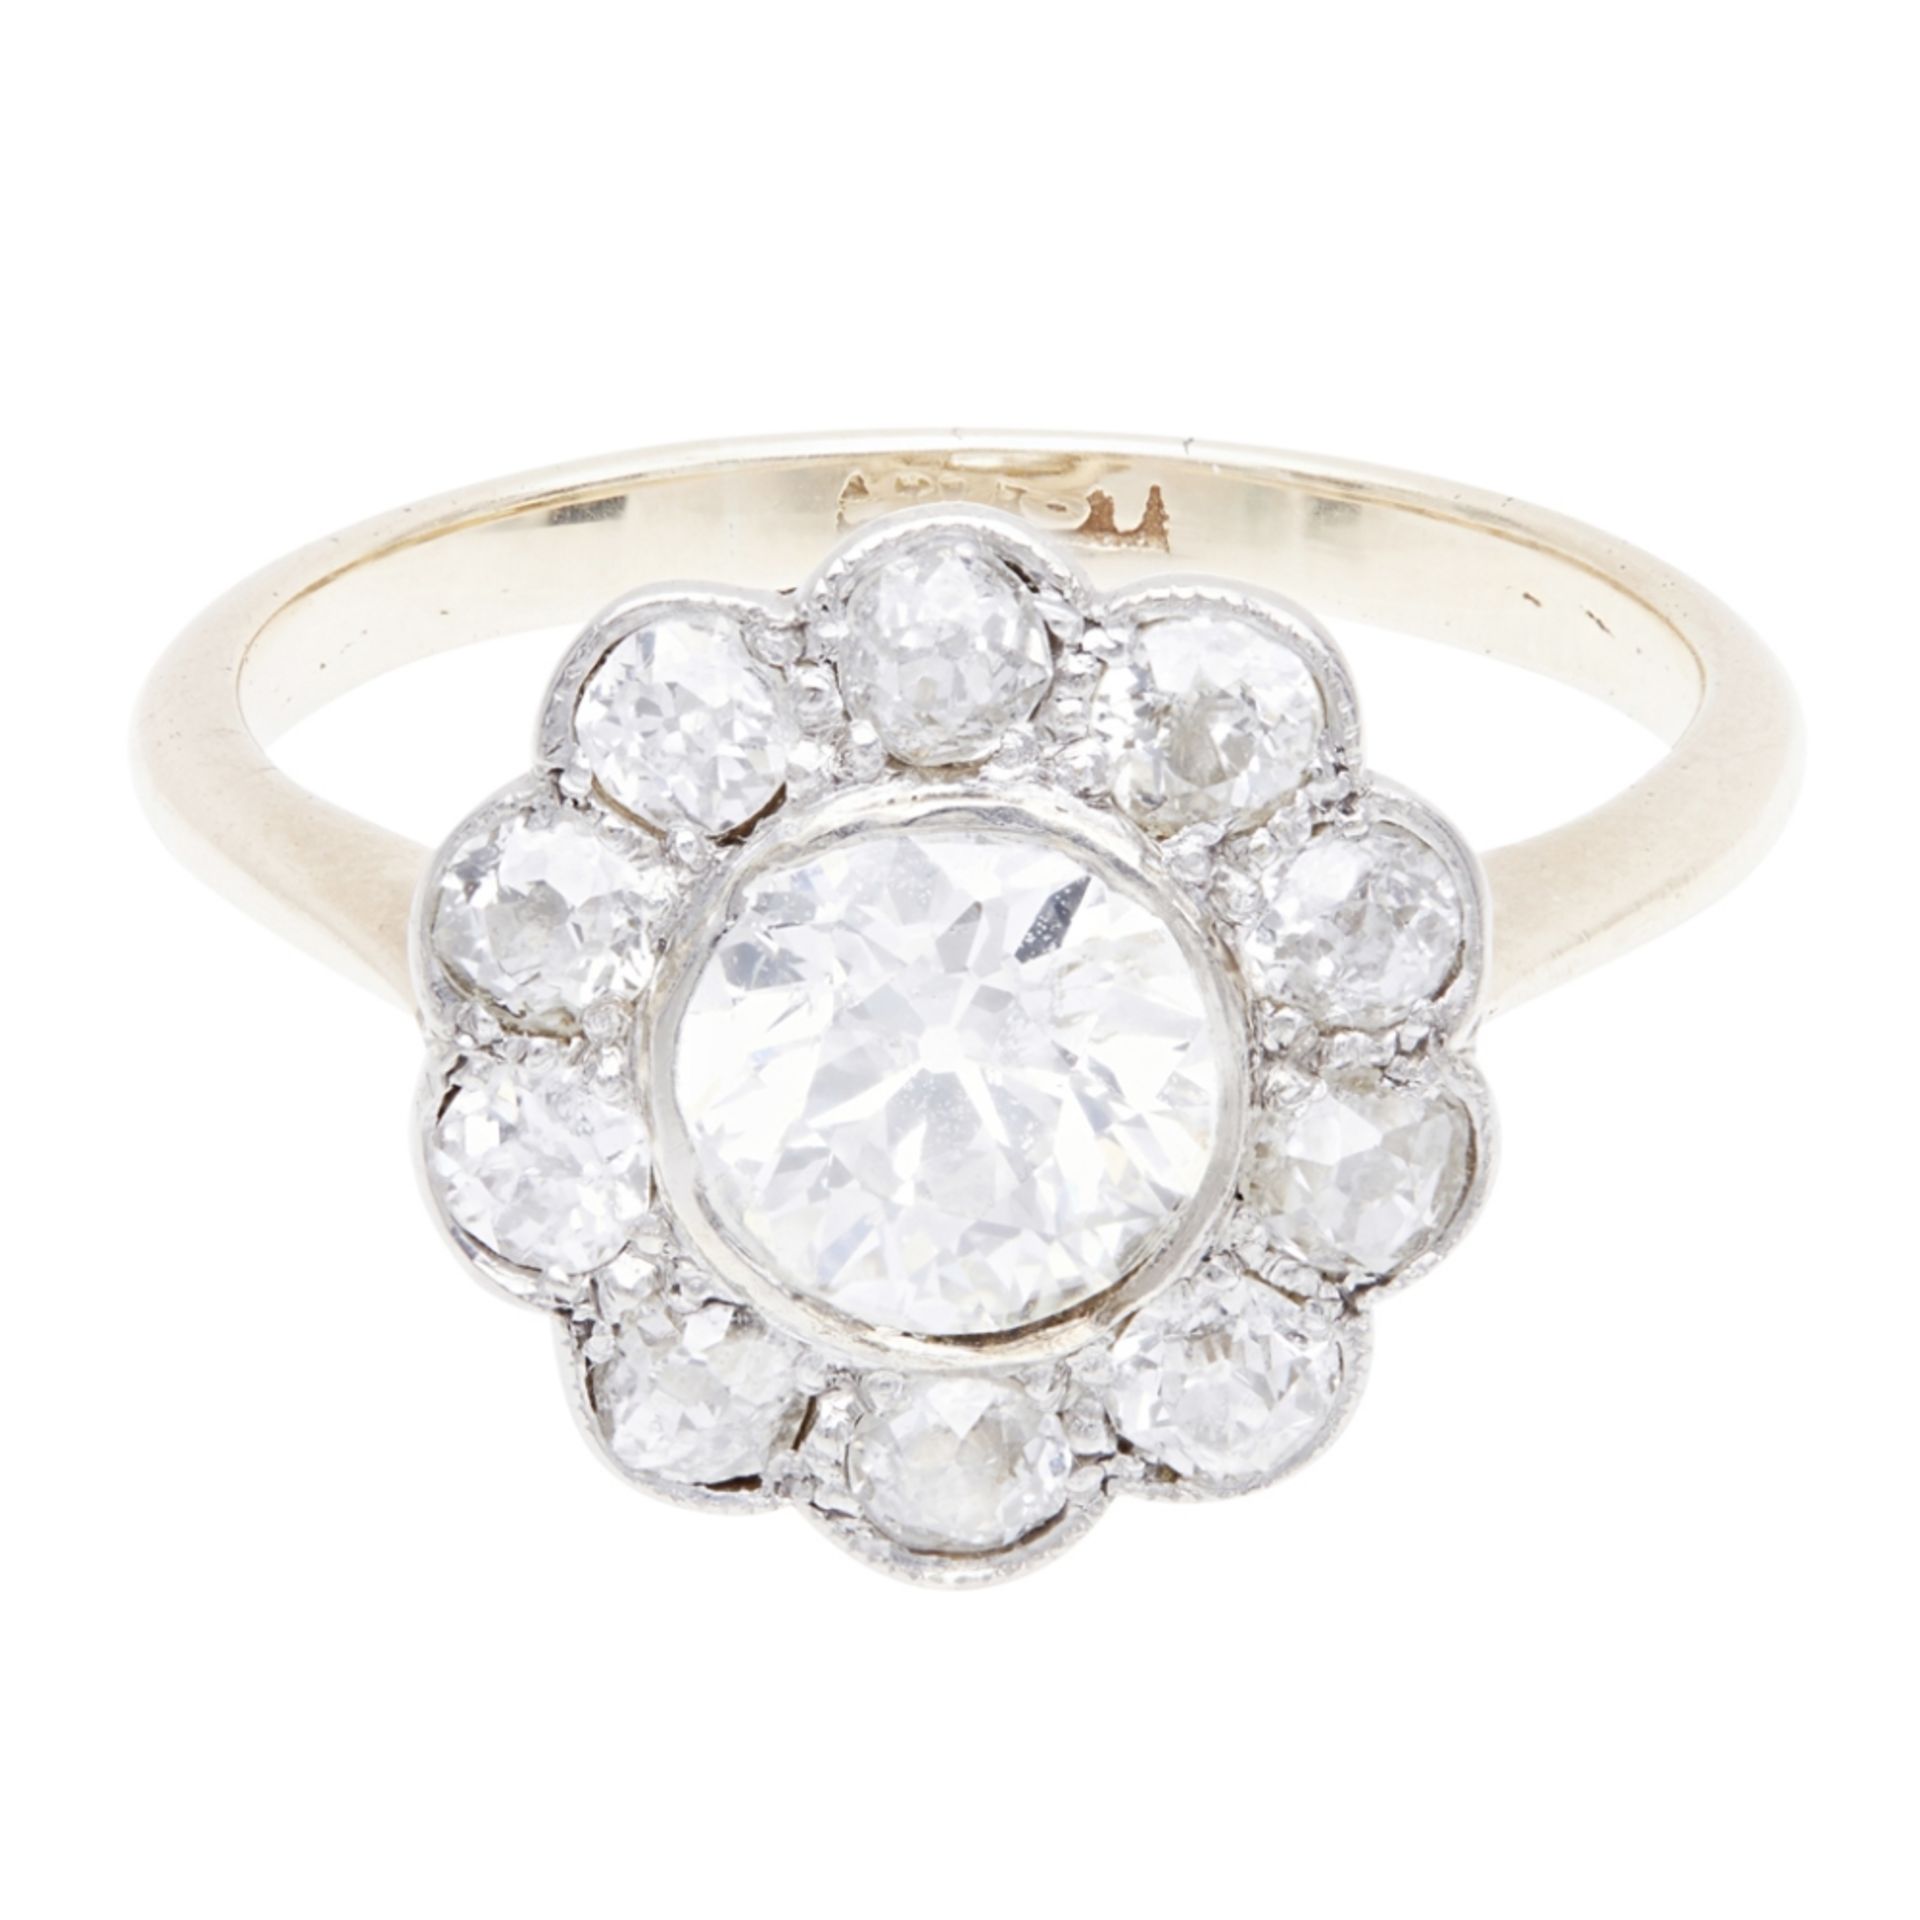 An early 20th century diamond set cluster ring collet set with an old-round cut diamond, in a border